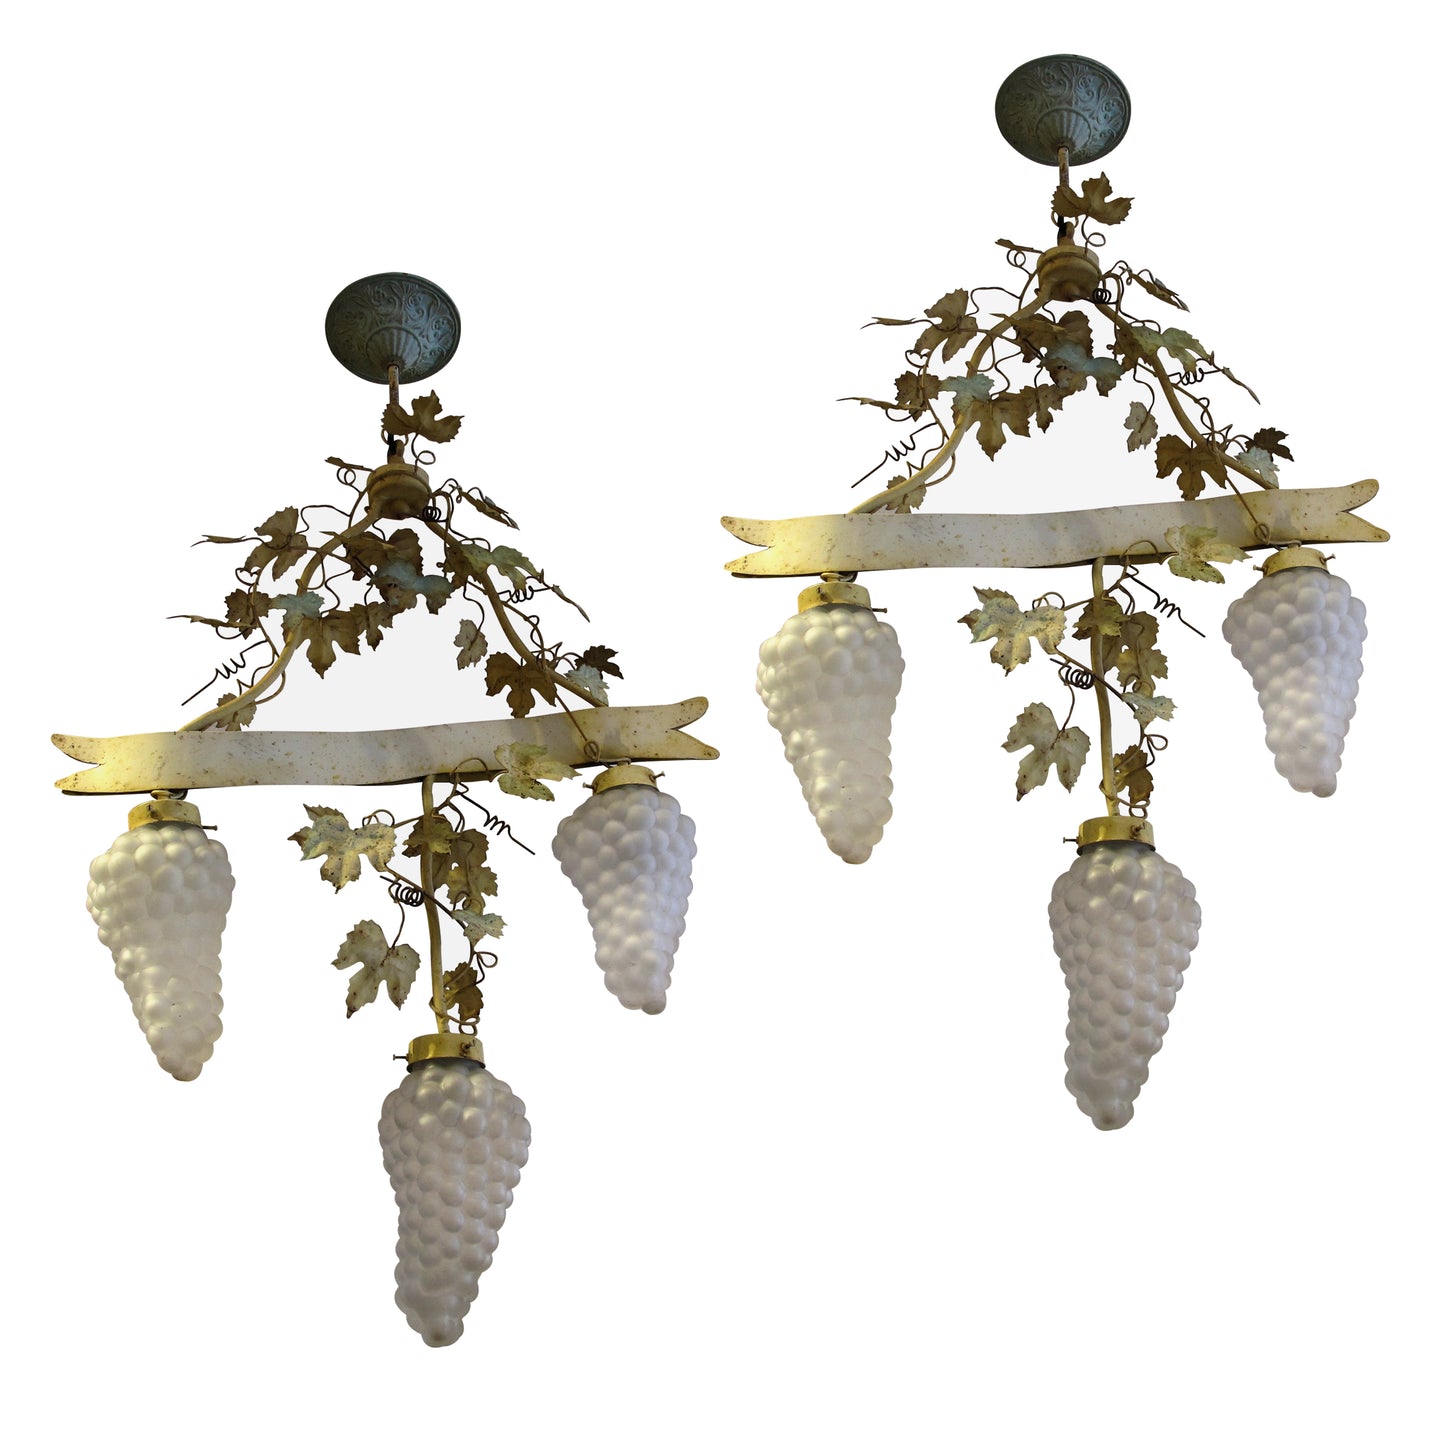 1950s Large Pair of Toleware Ceiling Lamps With Grapevine Glass Shades, French